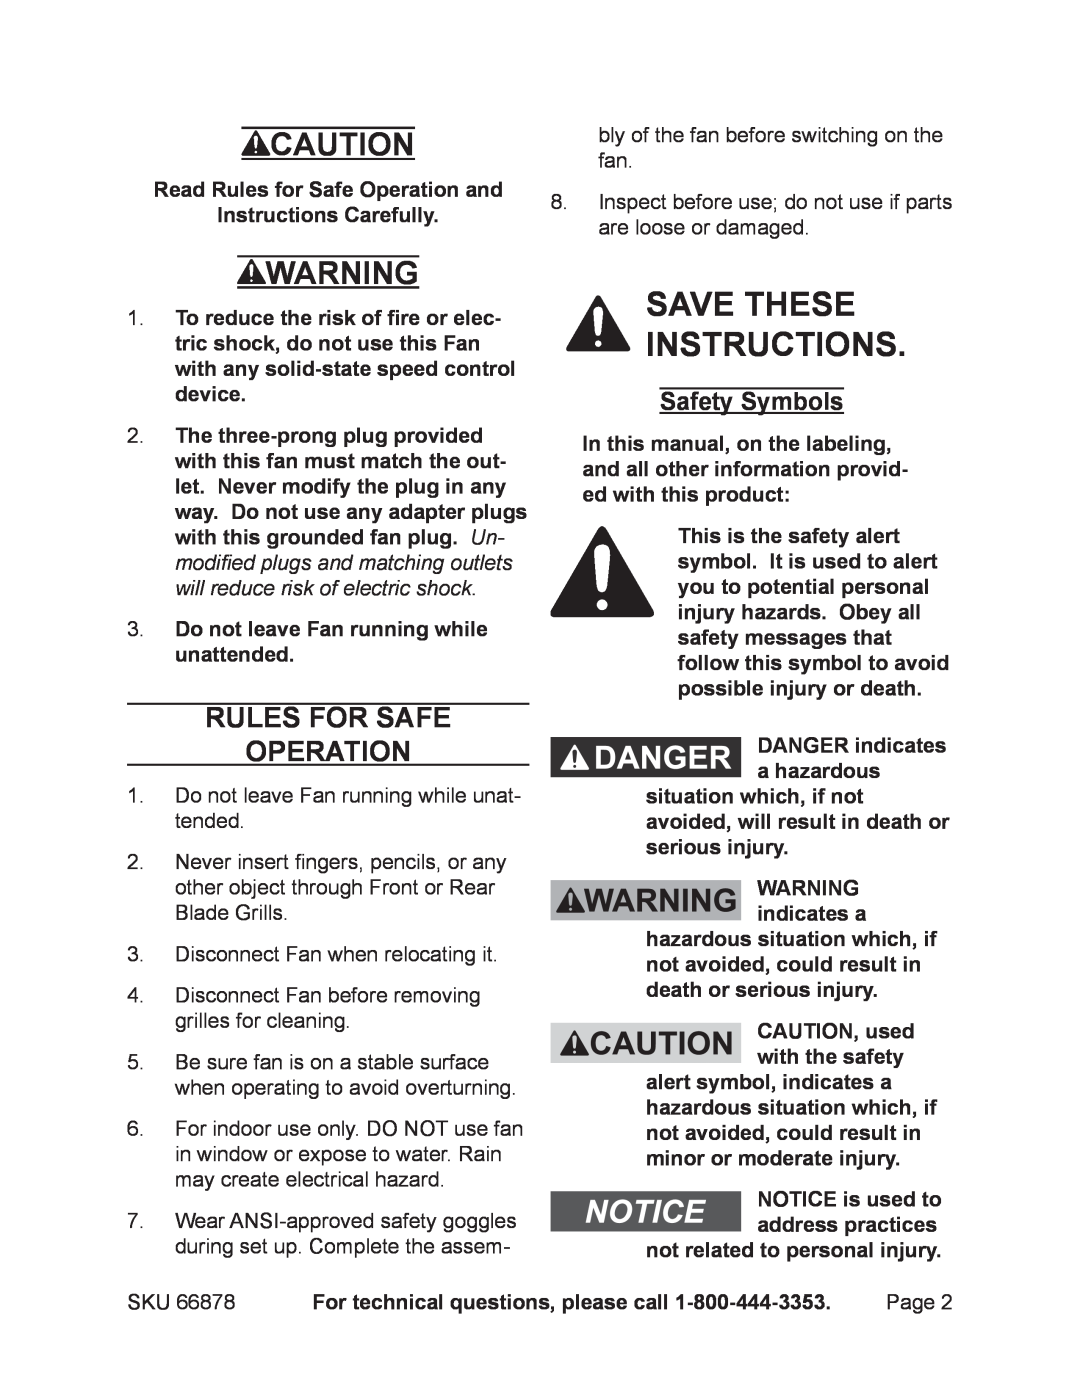 Chicago Electric 66878 Save these instructions, Rules For Safe Operation, Safety Symbols, DANGER indicates a hazardous 